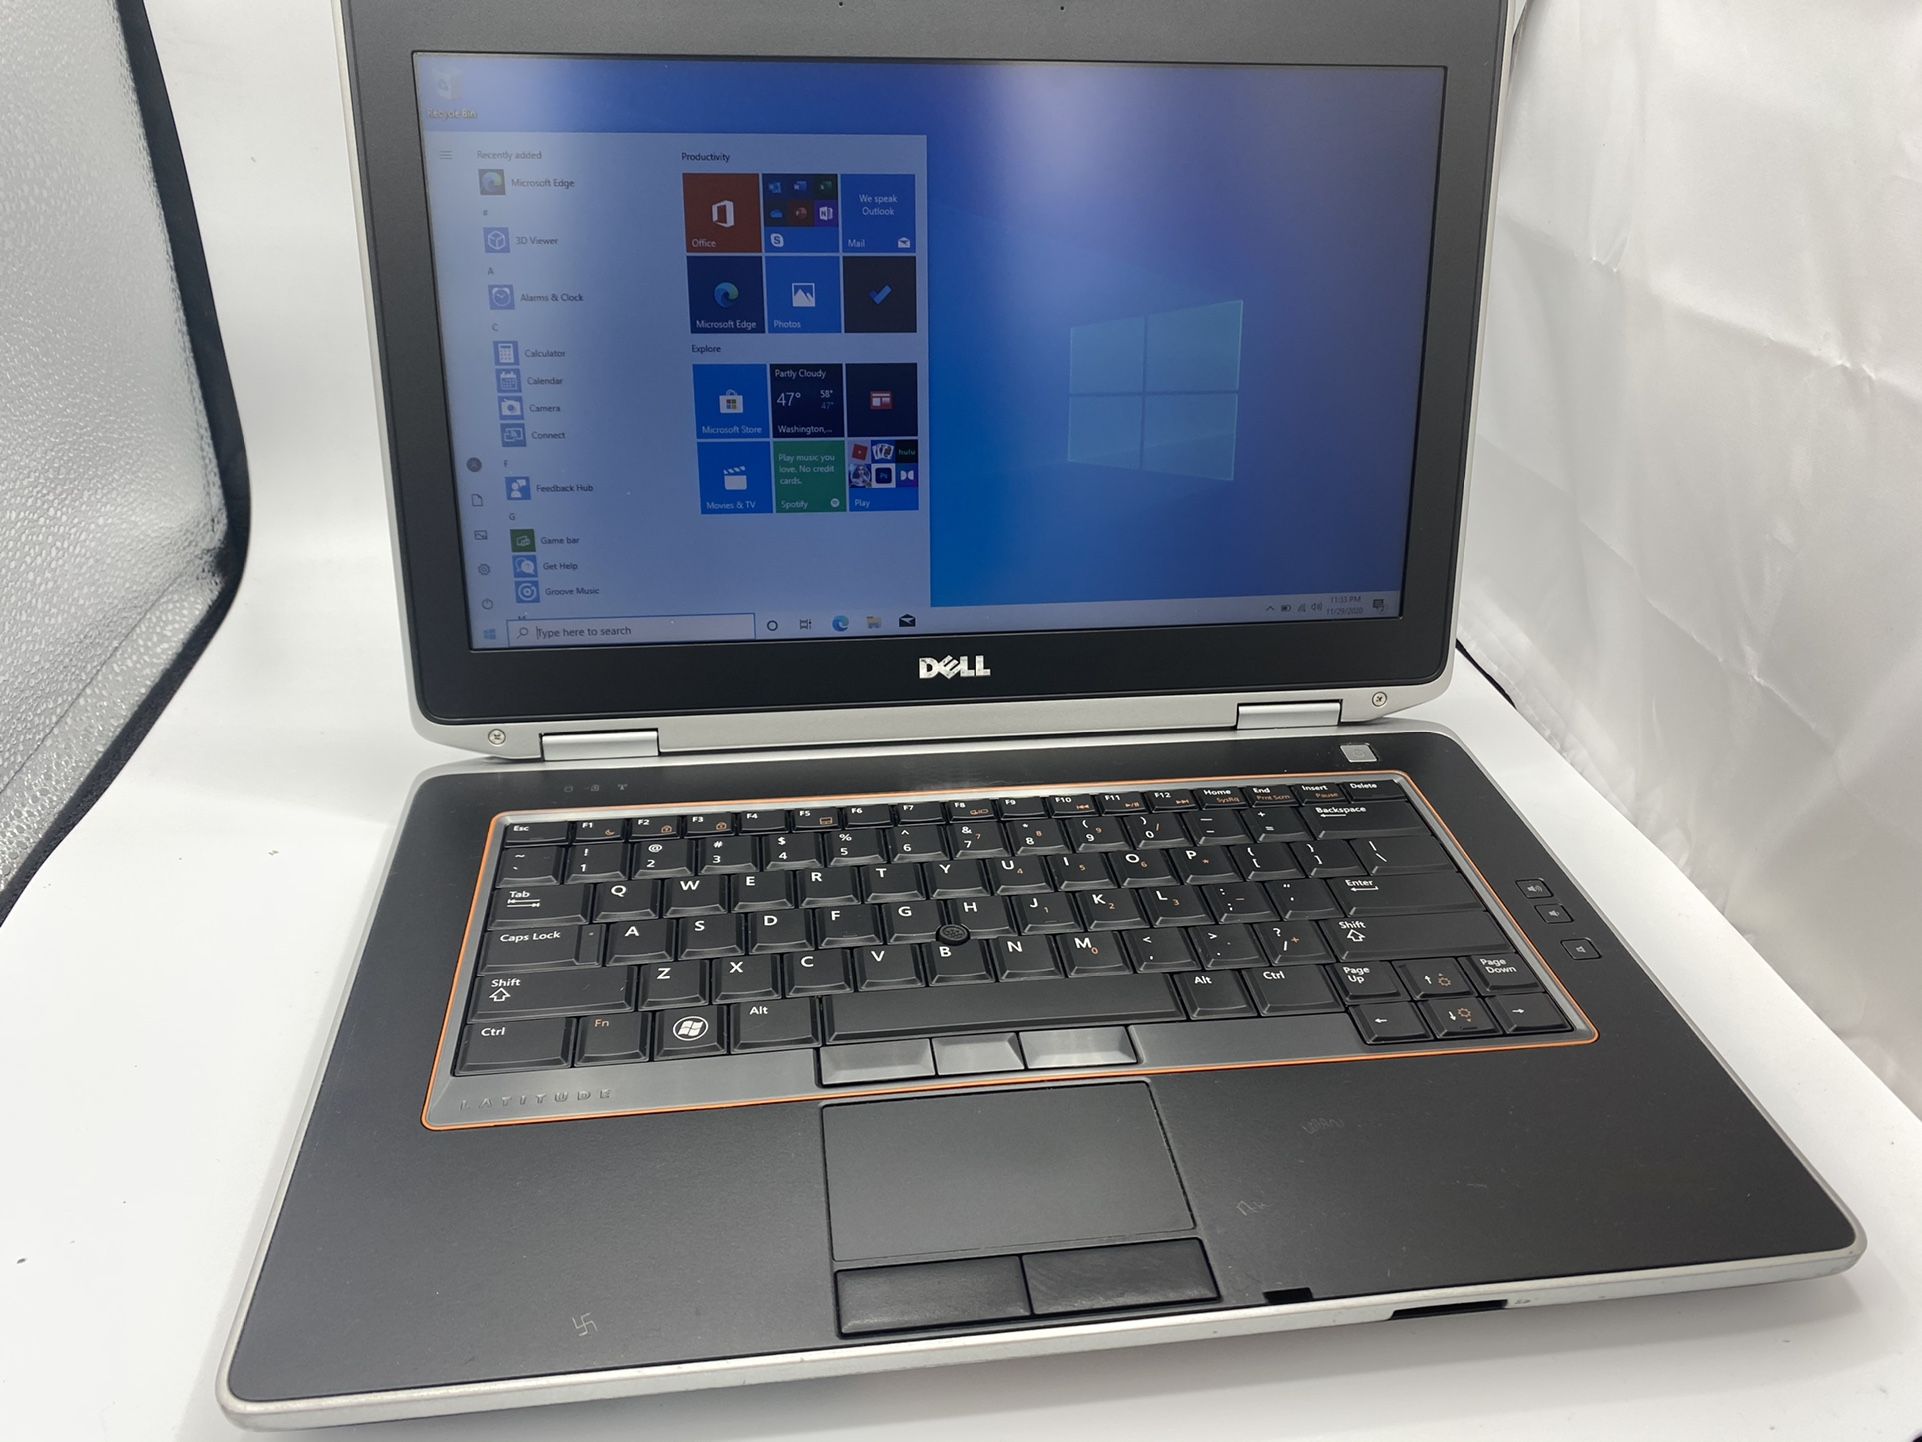 Dell Latitude E6420, intel Core i5, 128gb SSD, 4gb ram, windows 10, CD/DVD, NO webcam , AC adapter, works perfect, no working issue . It’s a used lapt